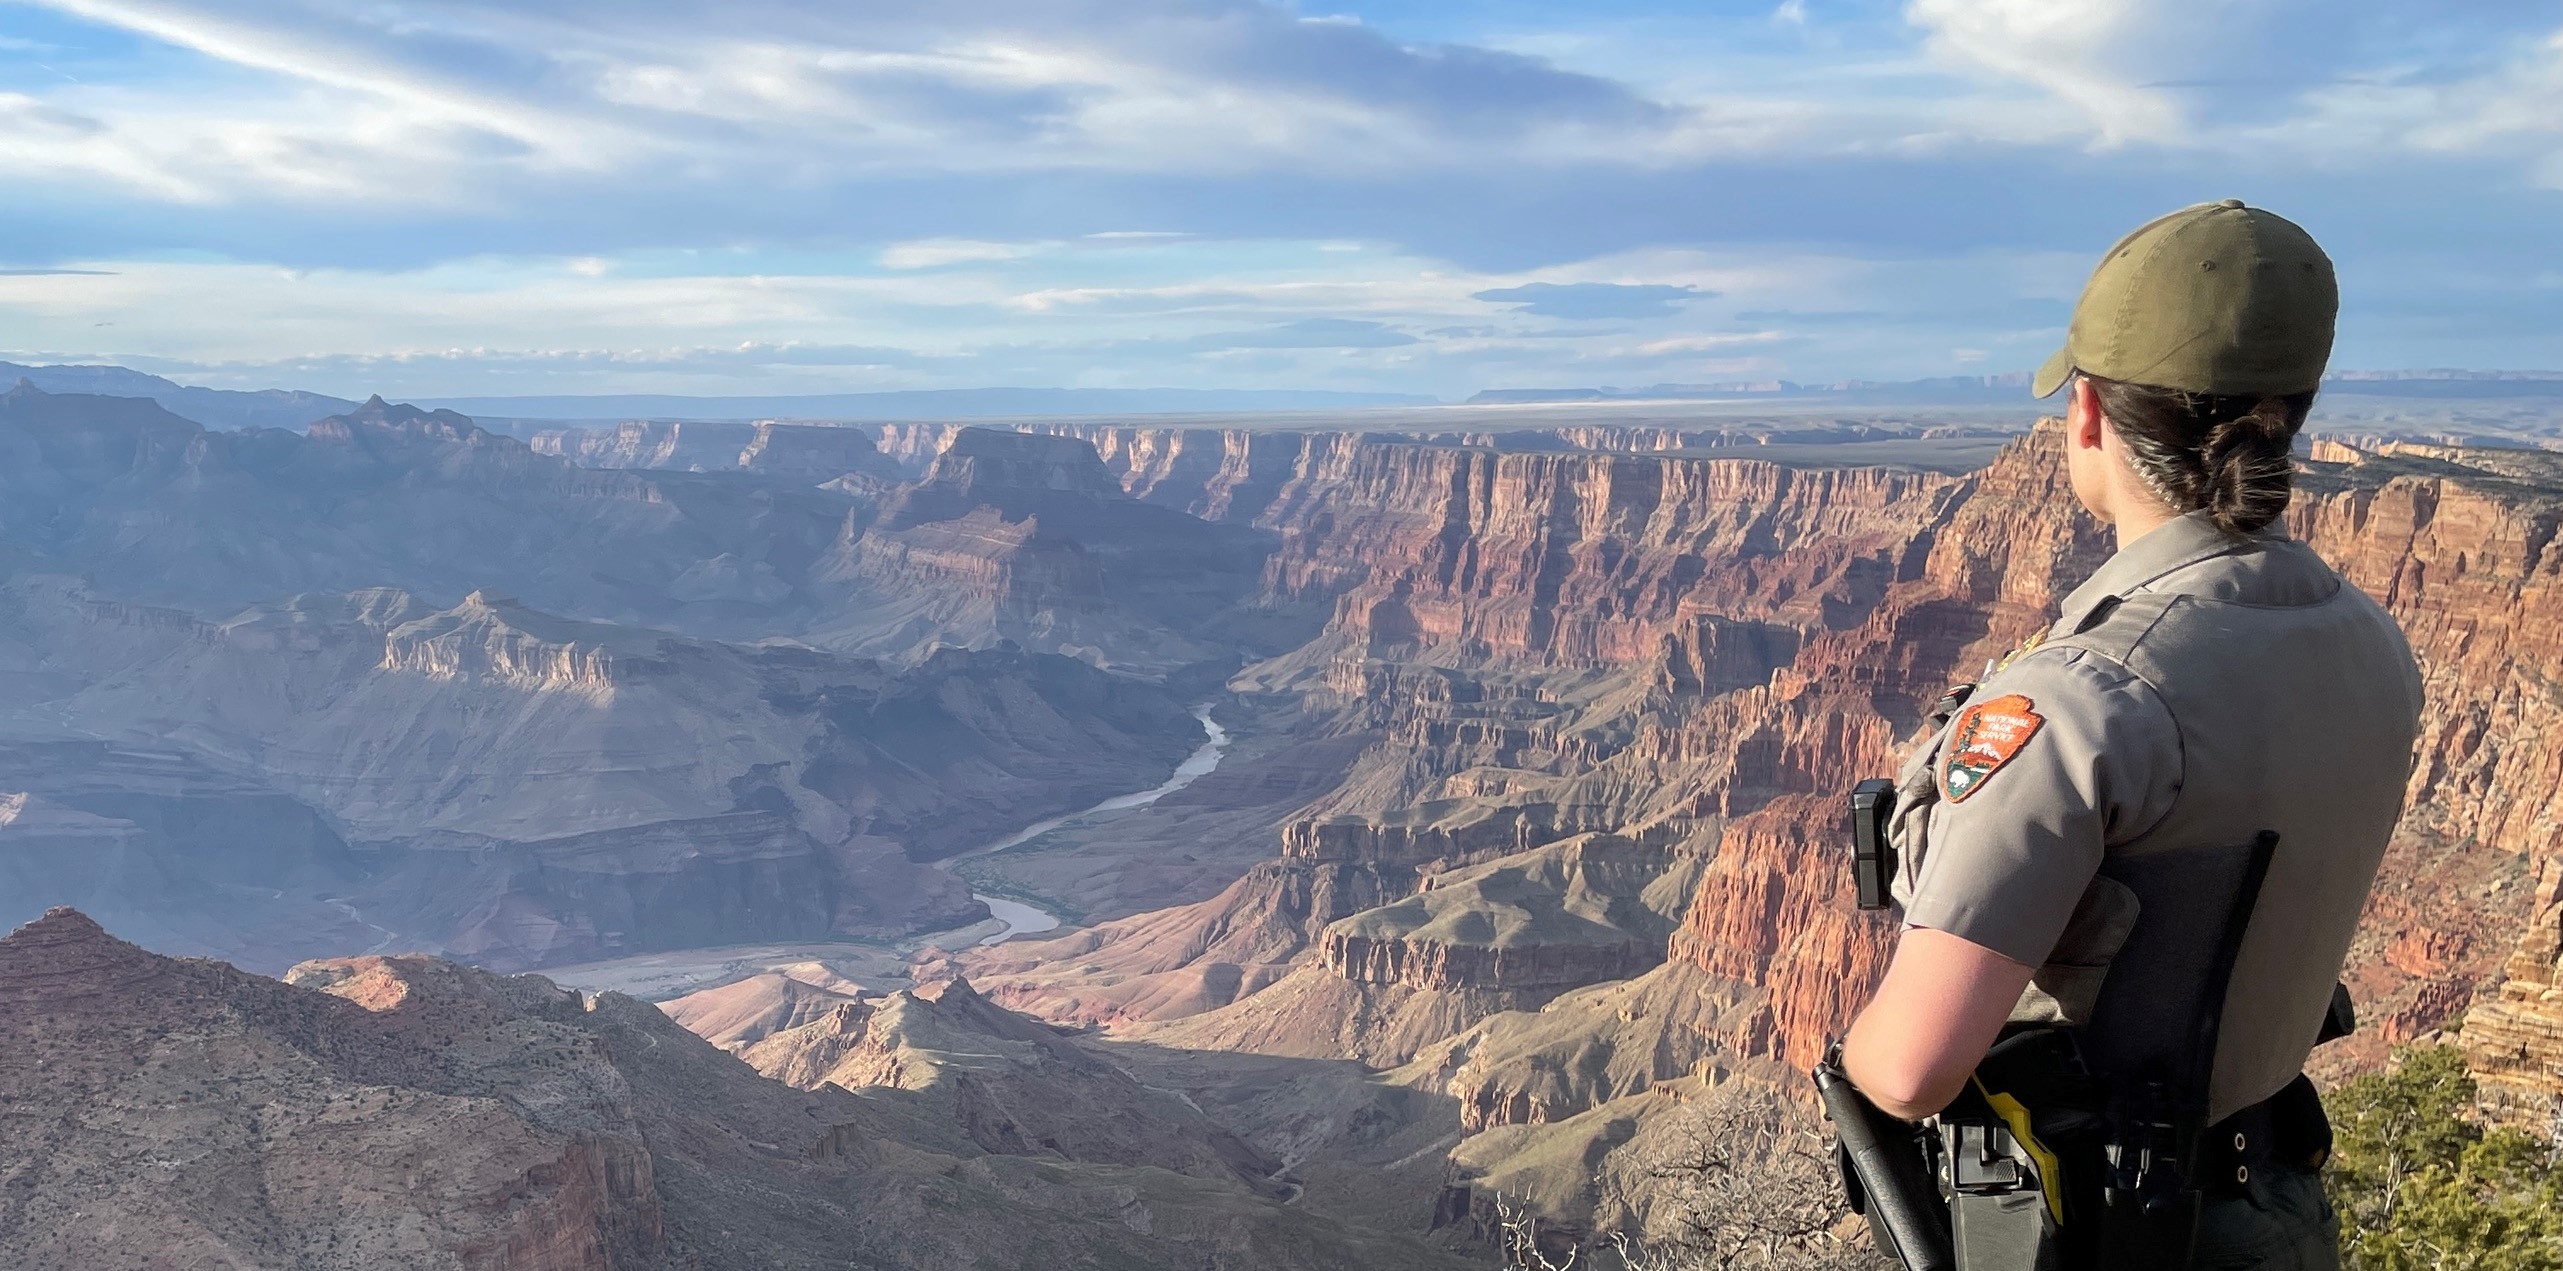 A ranger stands at the rim of the canyon looking into the canyon vista